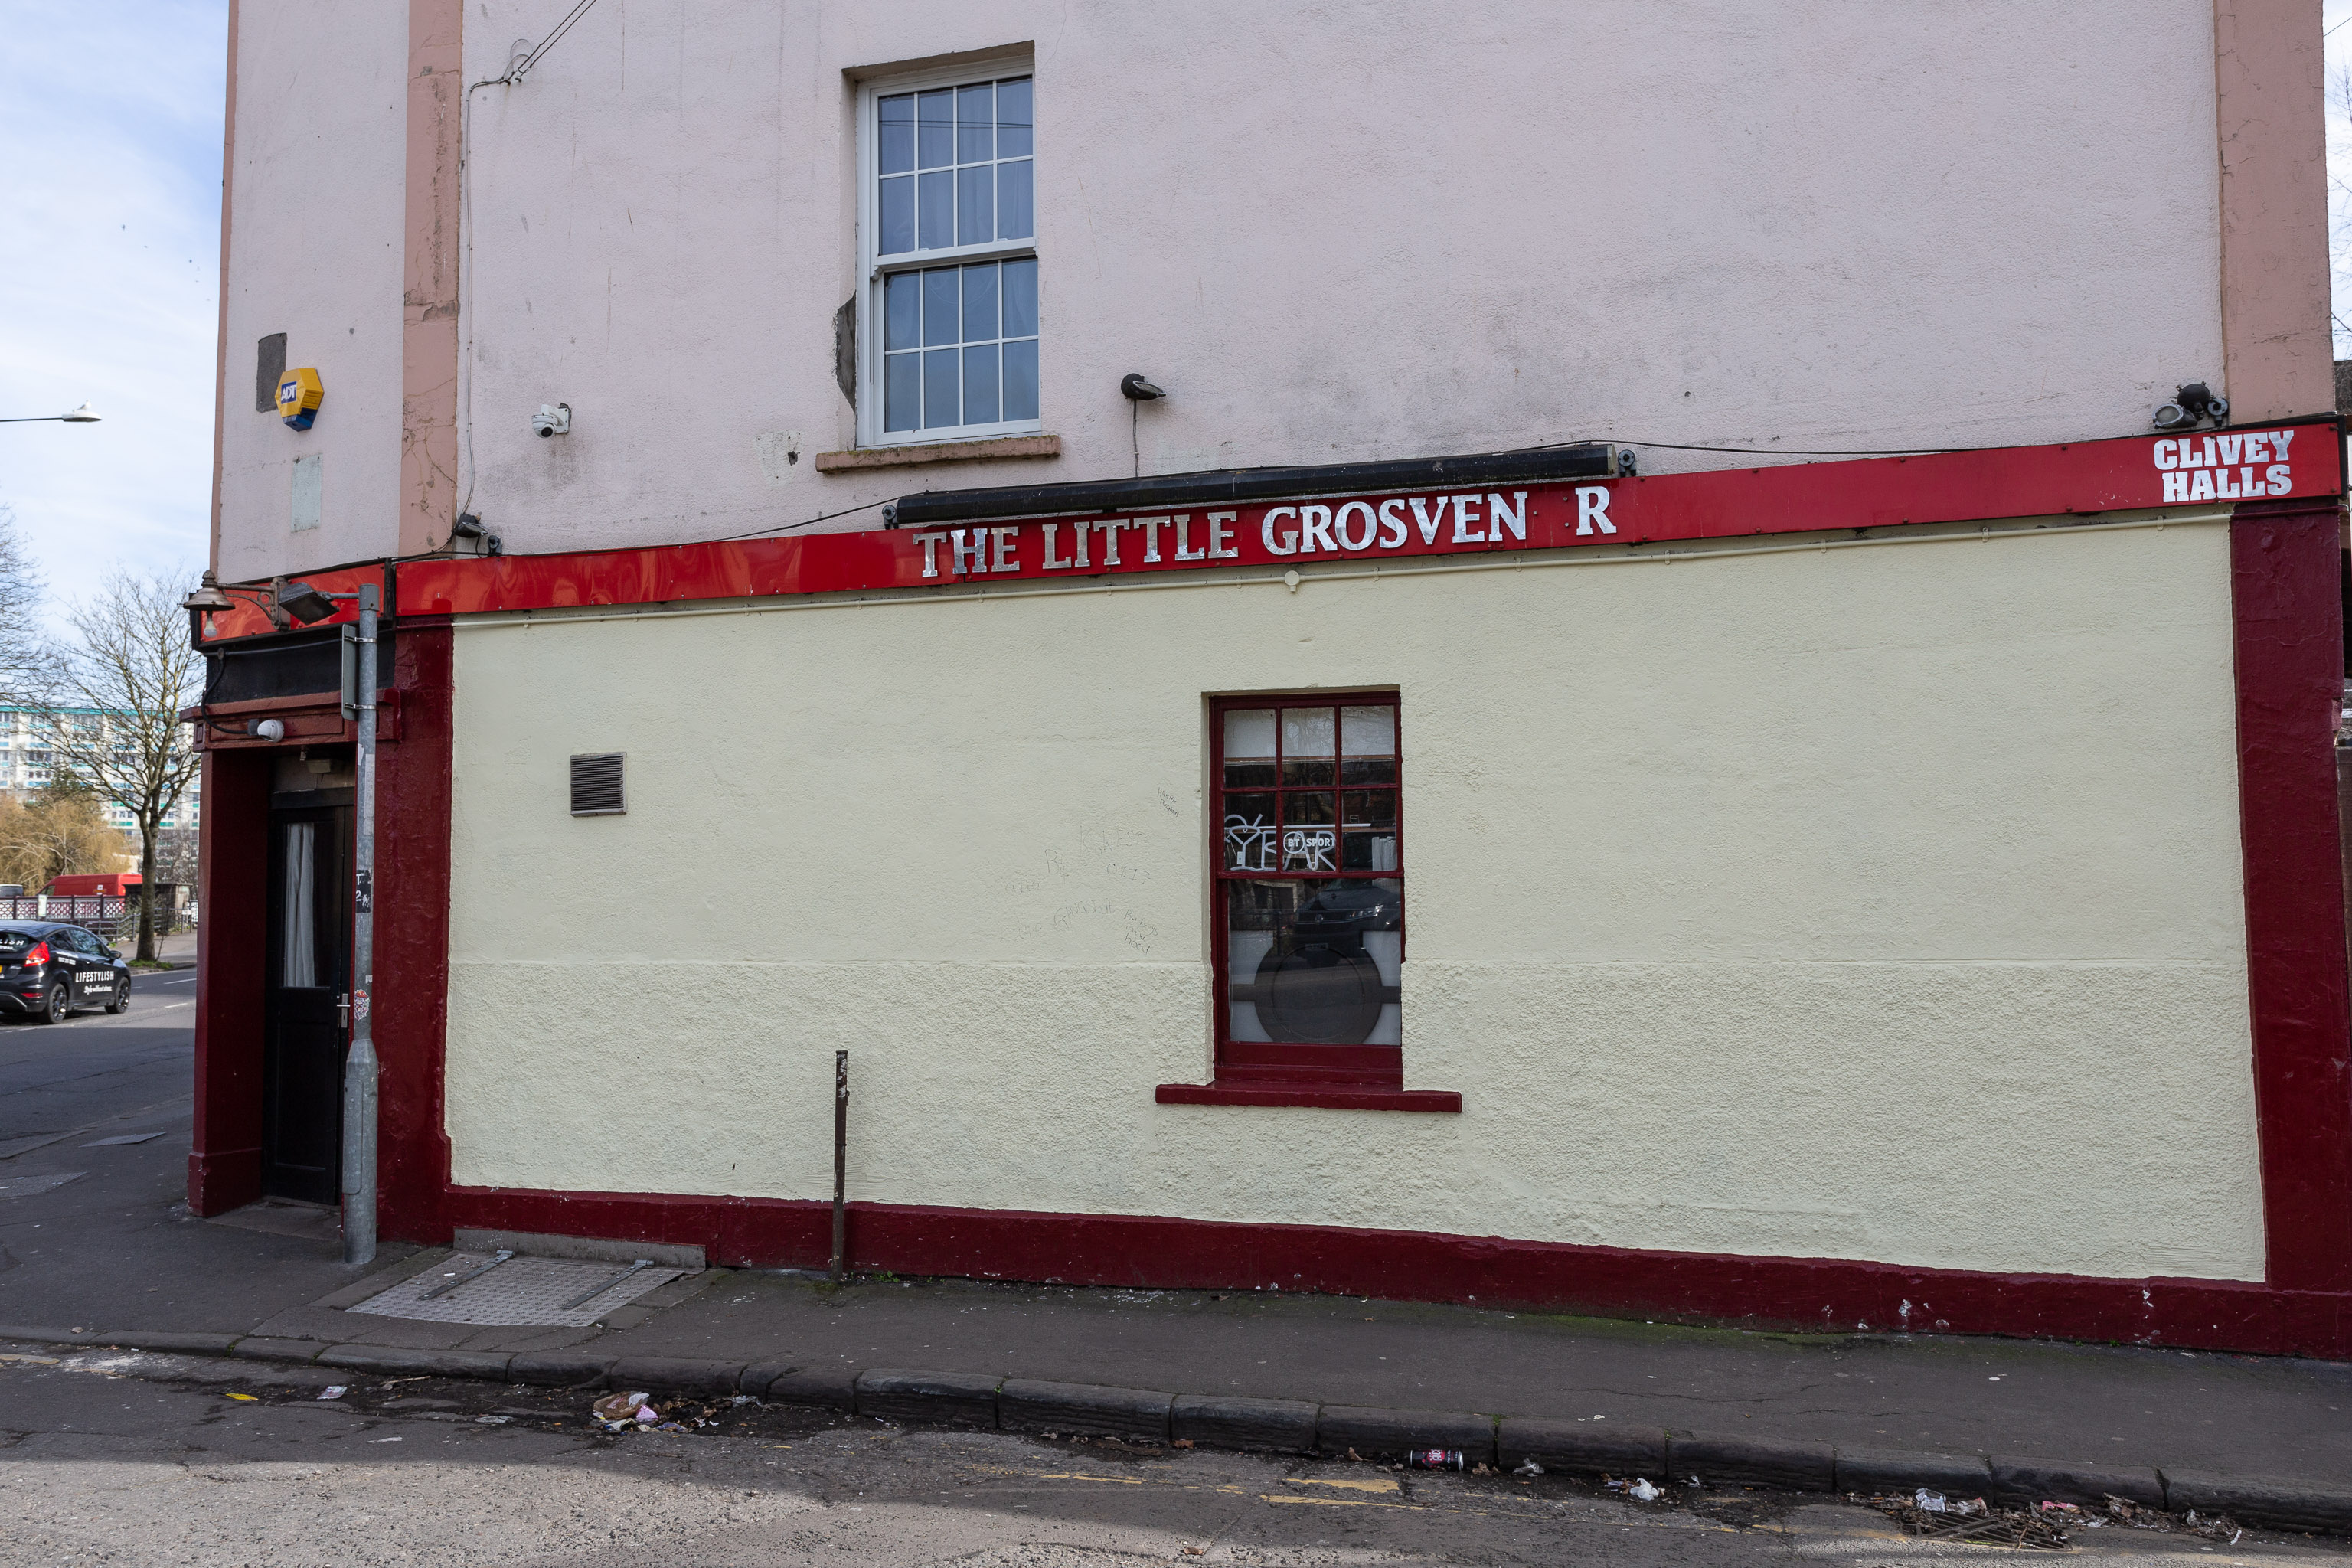 The Little Grosven R
There's a lot of little pubs around here I've never set foot in.
